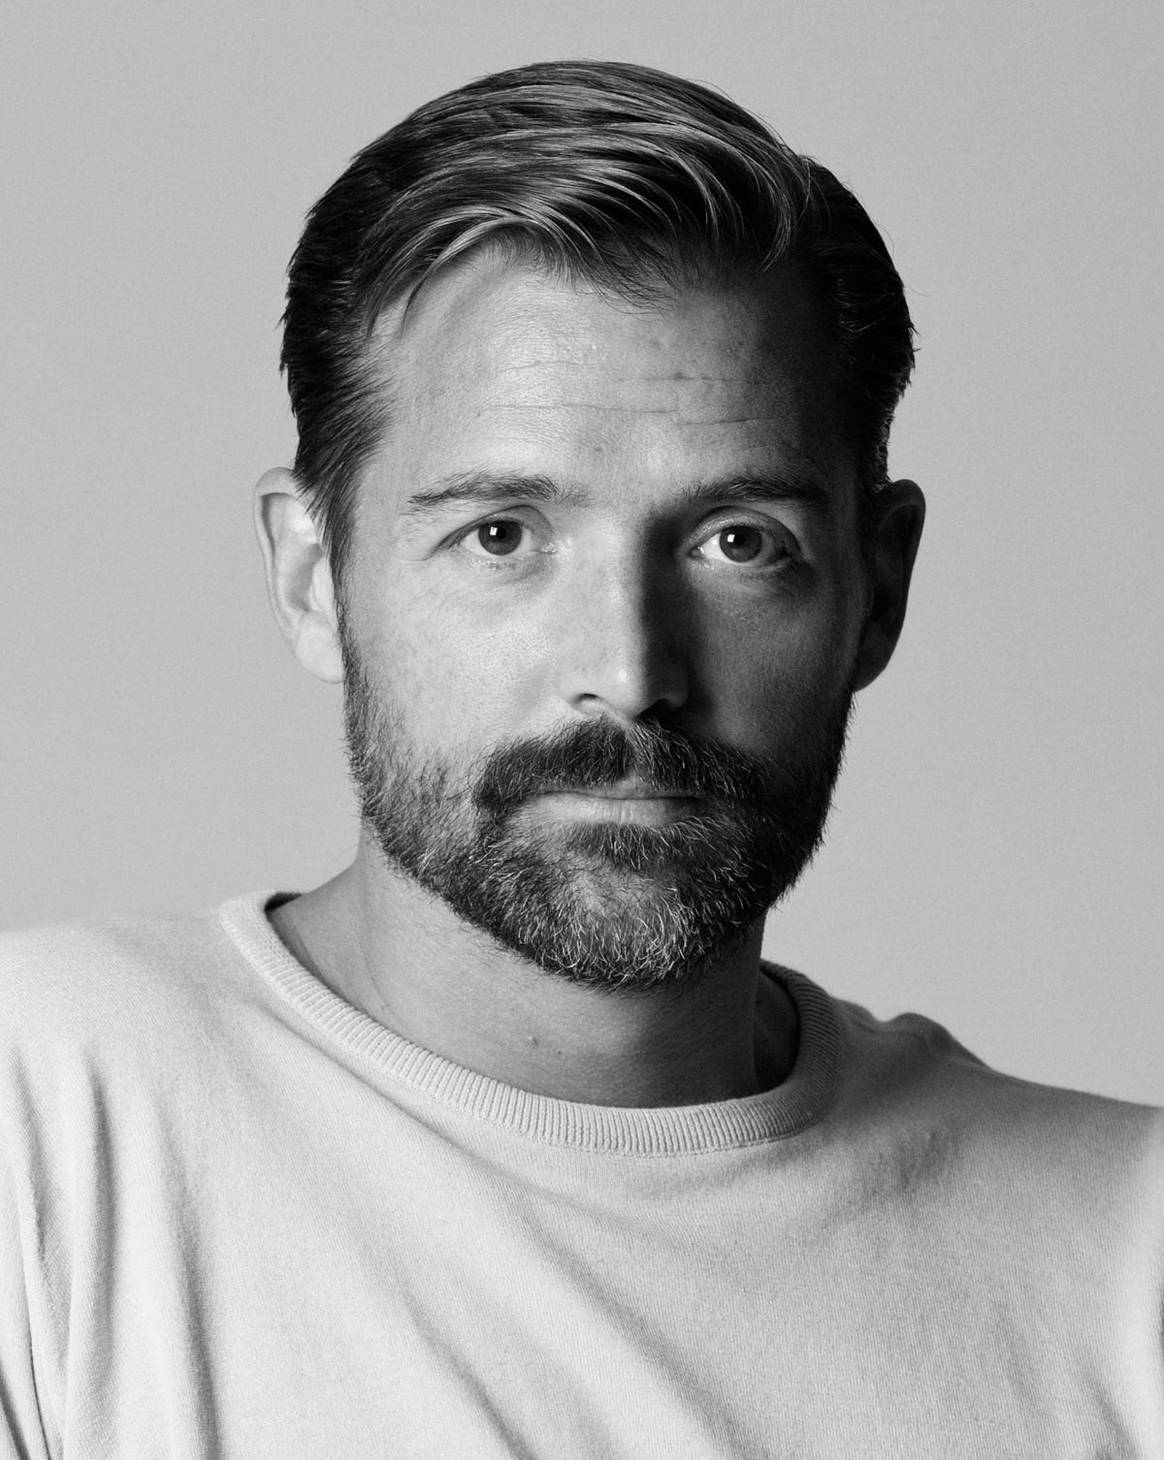 Patrick Grant and Brigitte Stepputtis will take to the Main Stage at Pure London July19